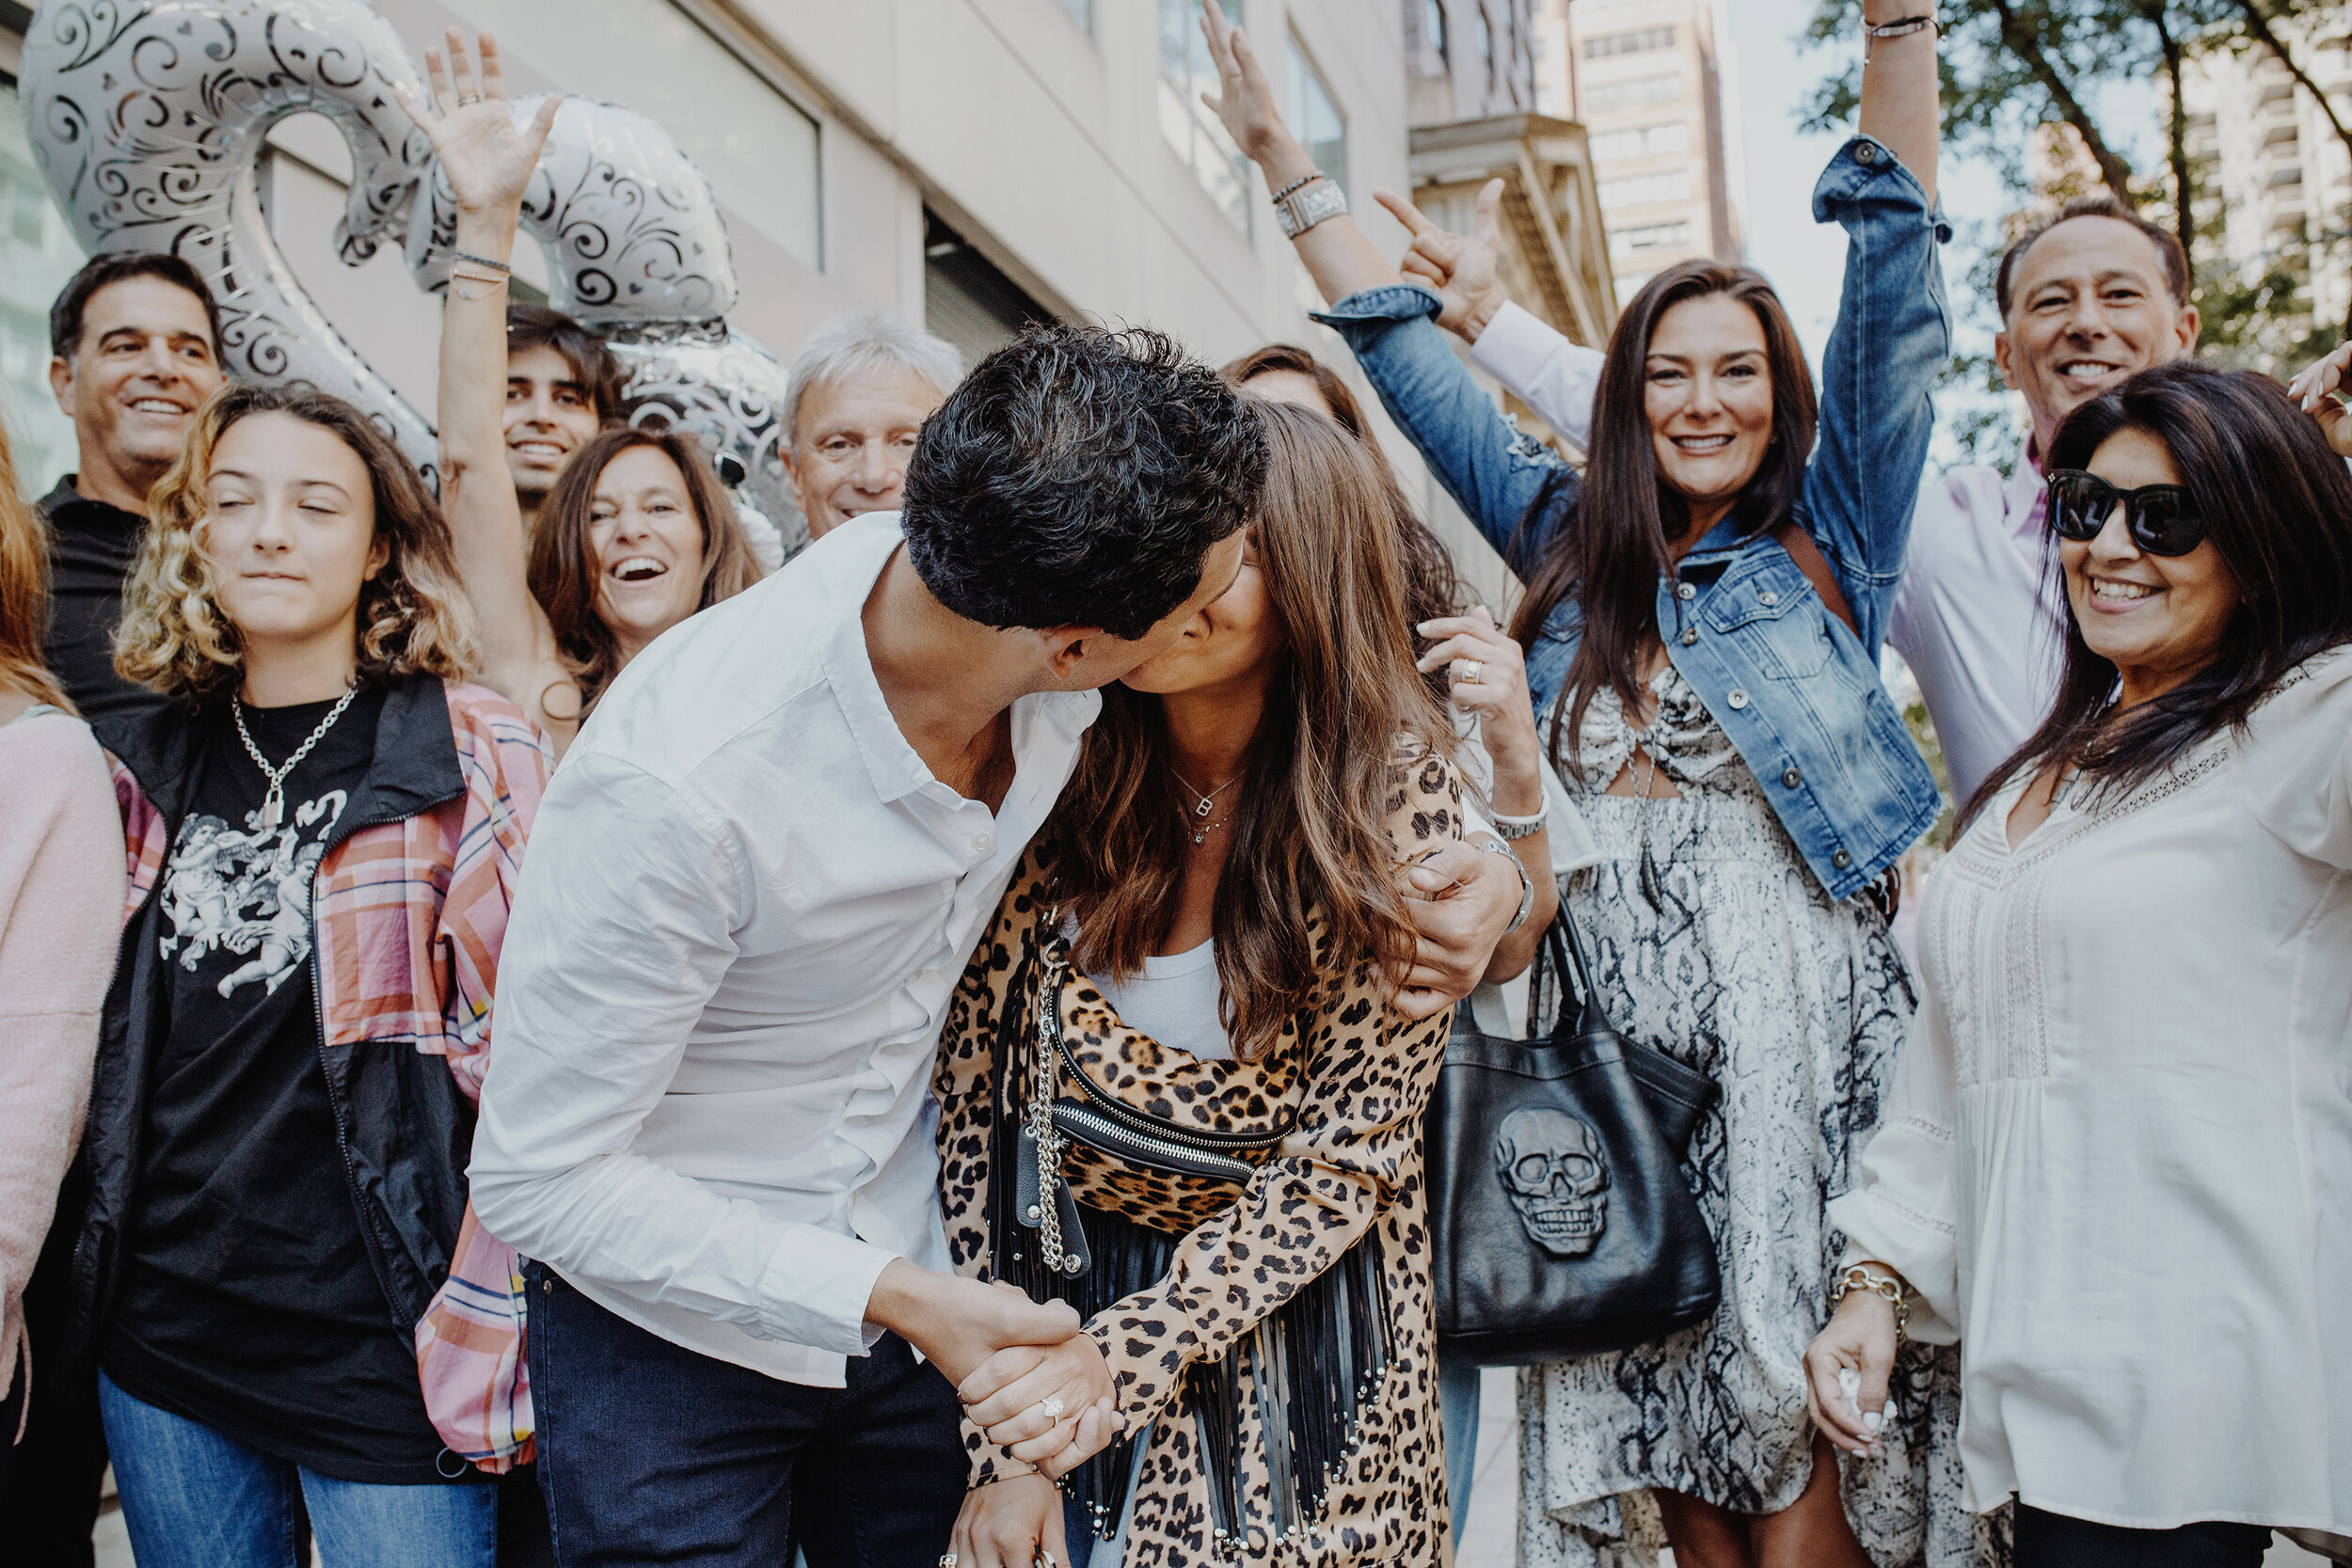 Fabulous Surprise Proposal Photography in NYC